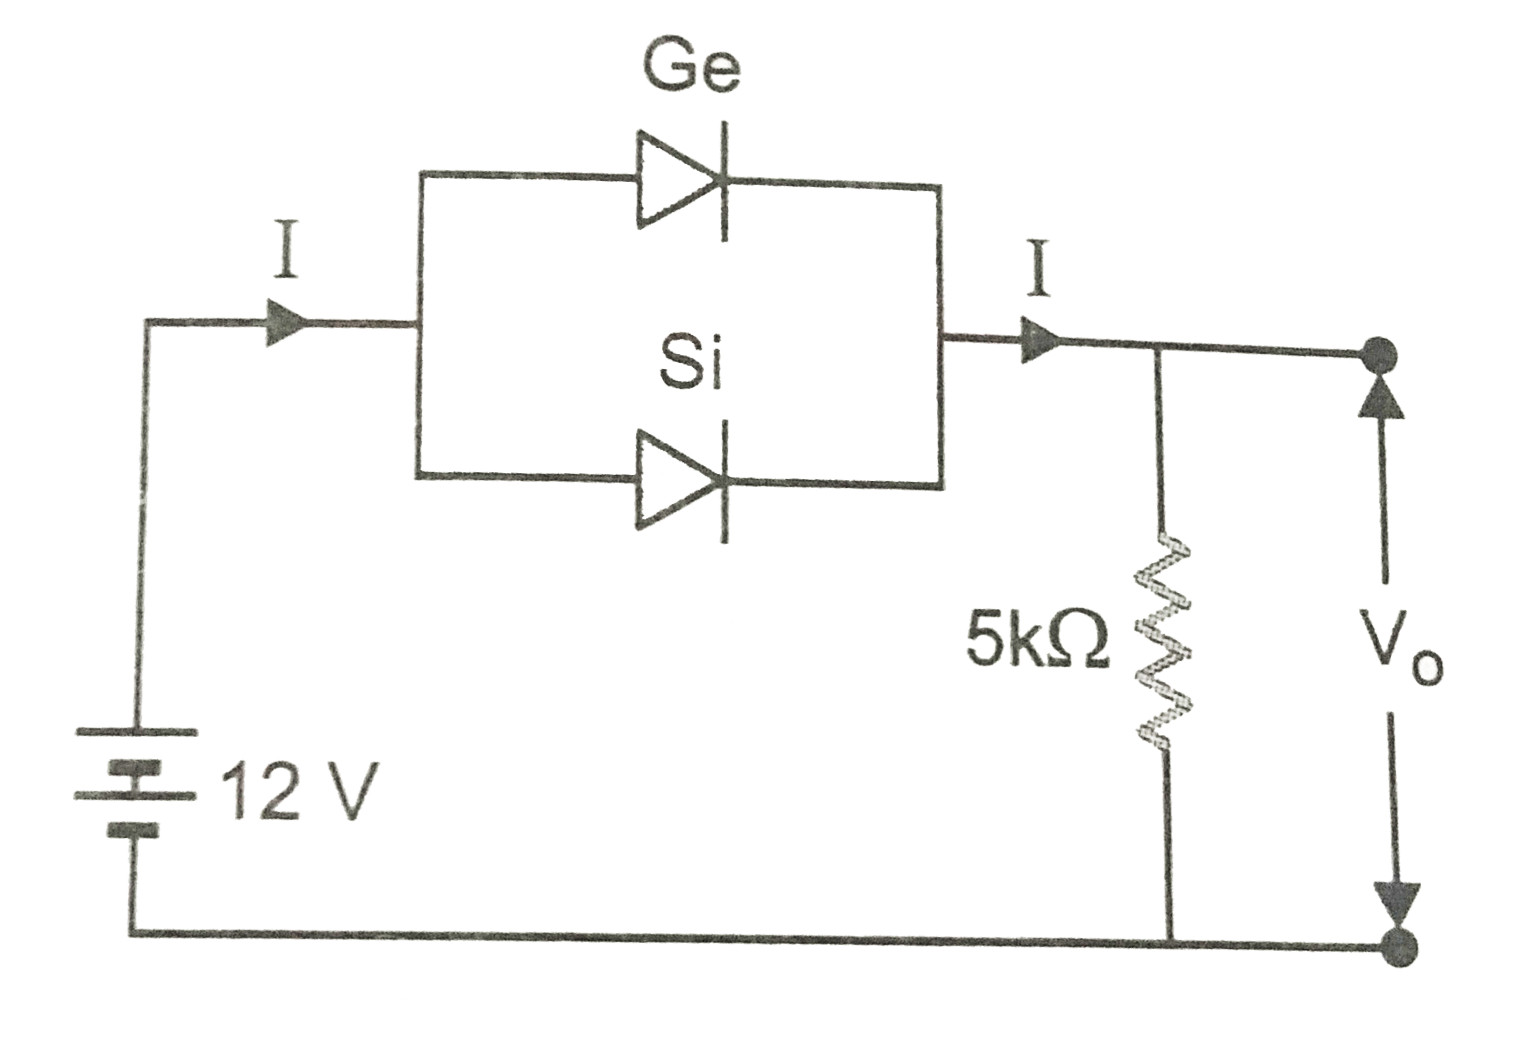 (i) calculate the value of output voltage V(0) and current I if silicon diode and germanium diode conduct at 0.7V and 0.3 V respectively. Fig.       (ii) If now germanium diode is cinnected to 12 V in reverse polarity, find new values of V(0) and I.